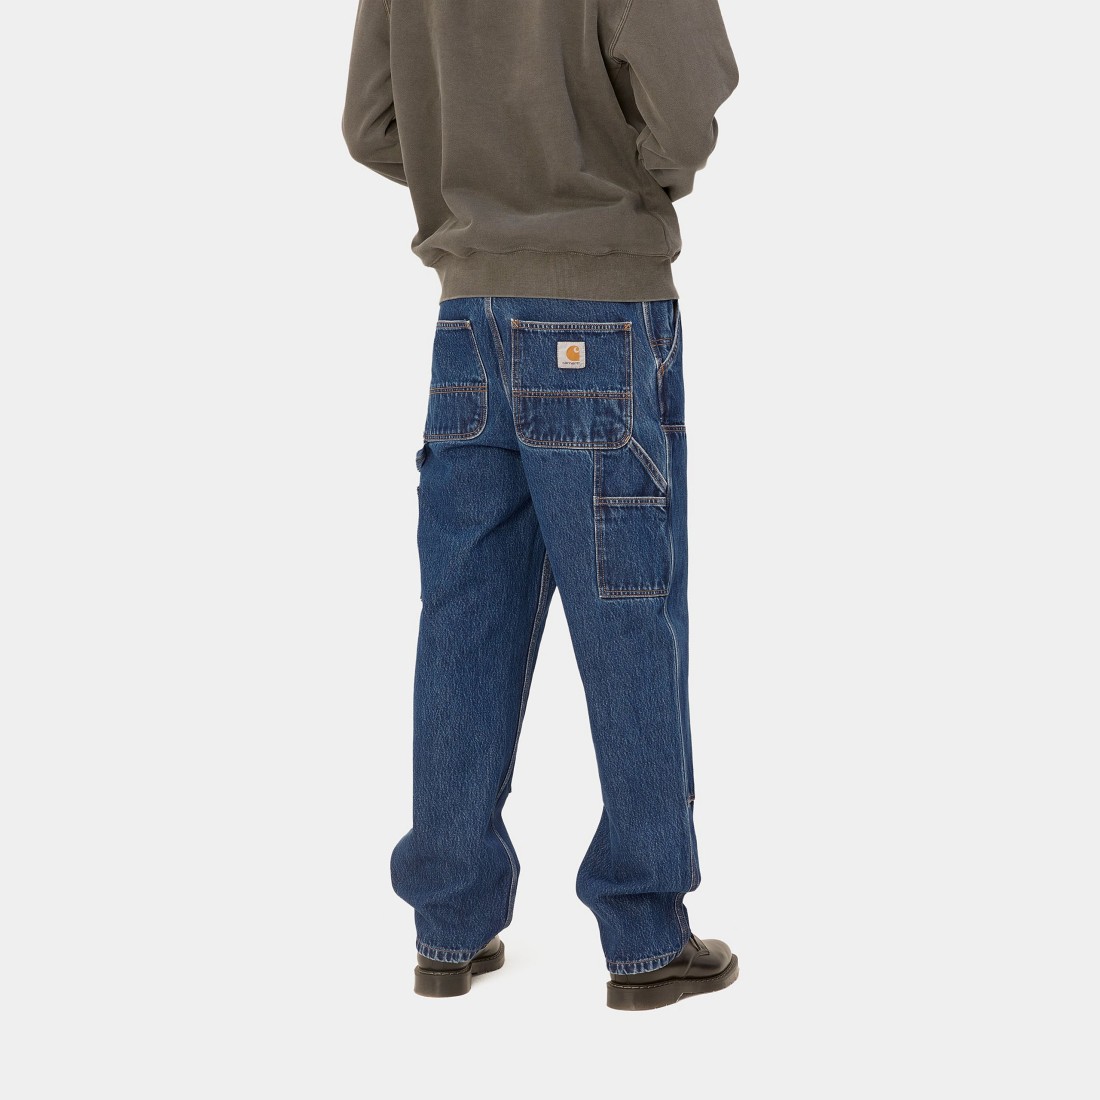 Double Knee Pant Blue Stone Washed Carhartt WIP